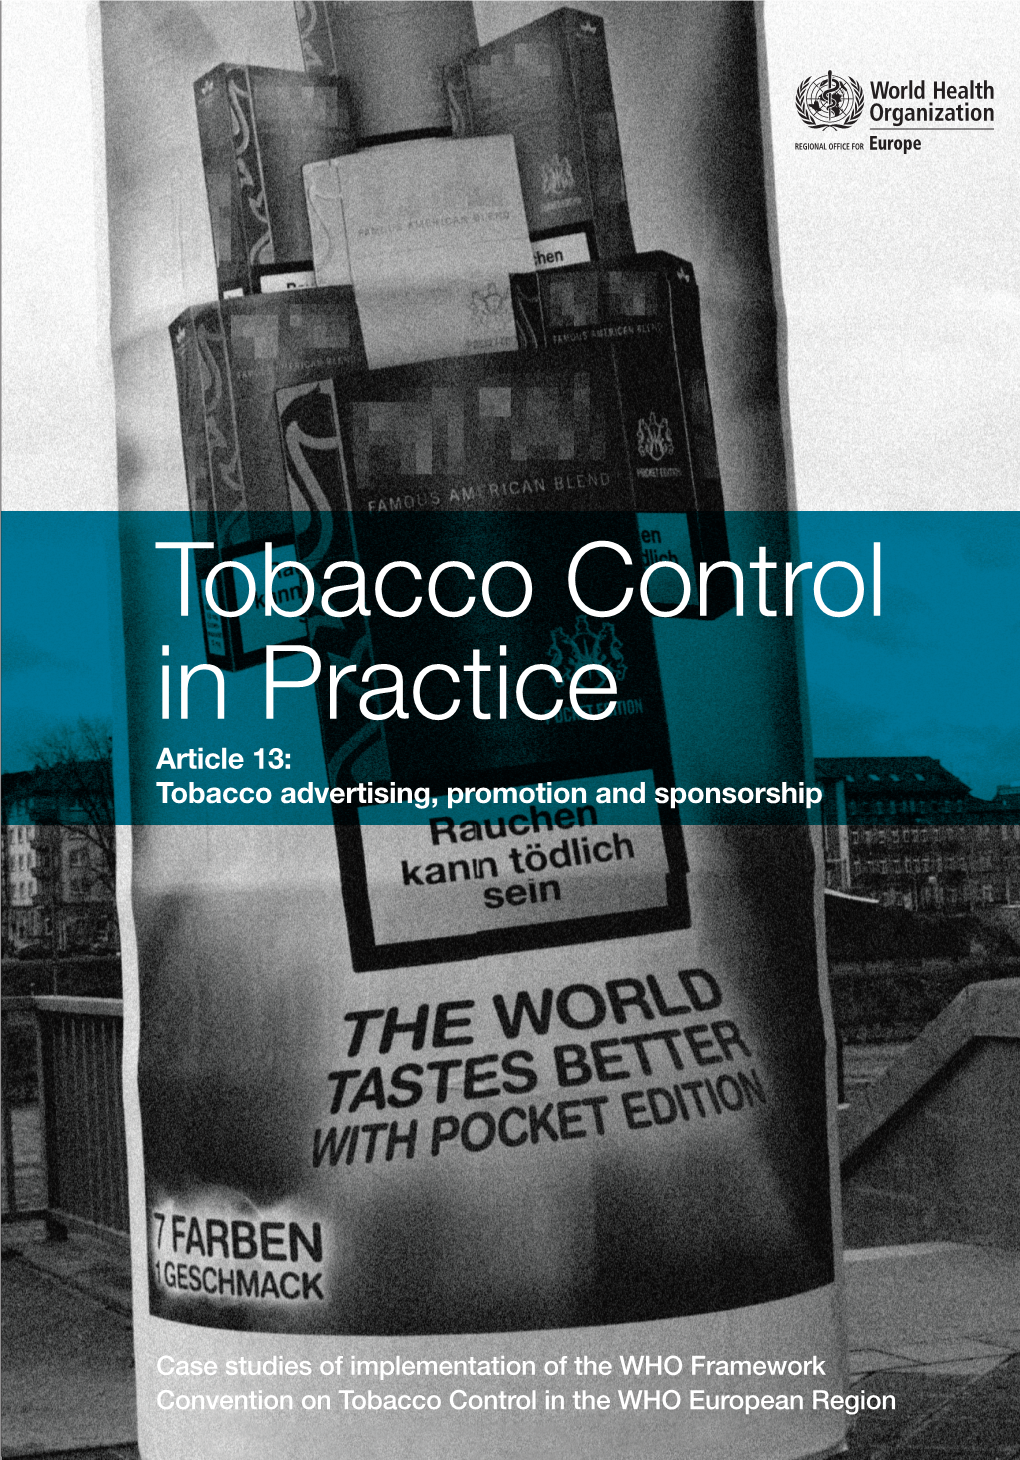 Tobacco Control in Practice Article 13: Tobacco Advertising, Promotion and Sponsorship